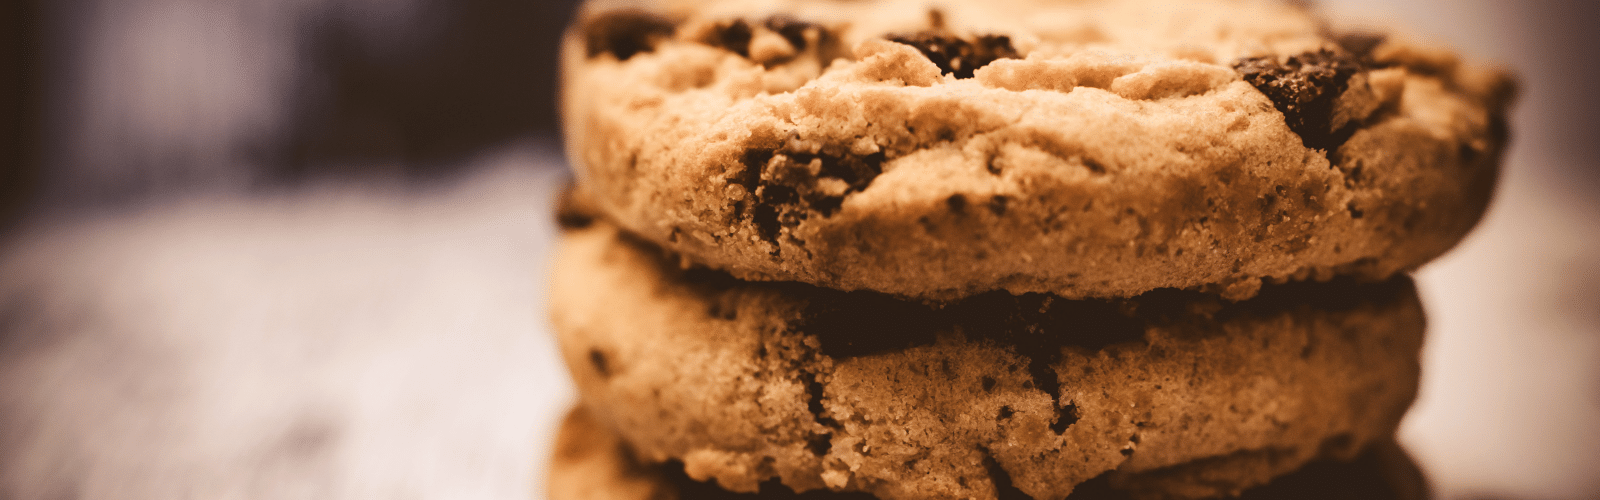 Top 5 homemade cookie recipes to make with kids